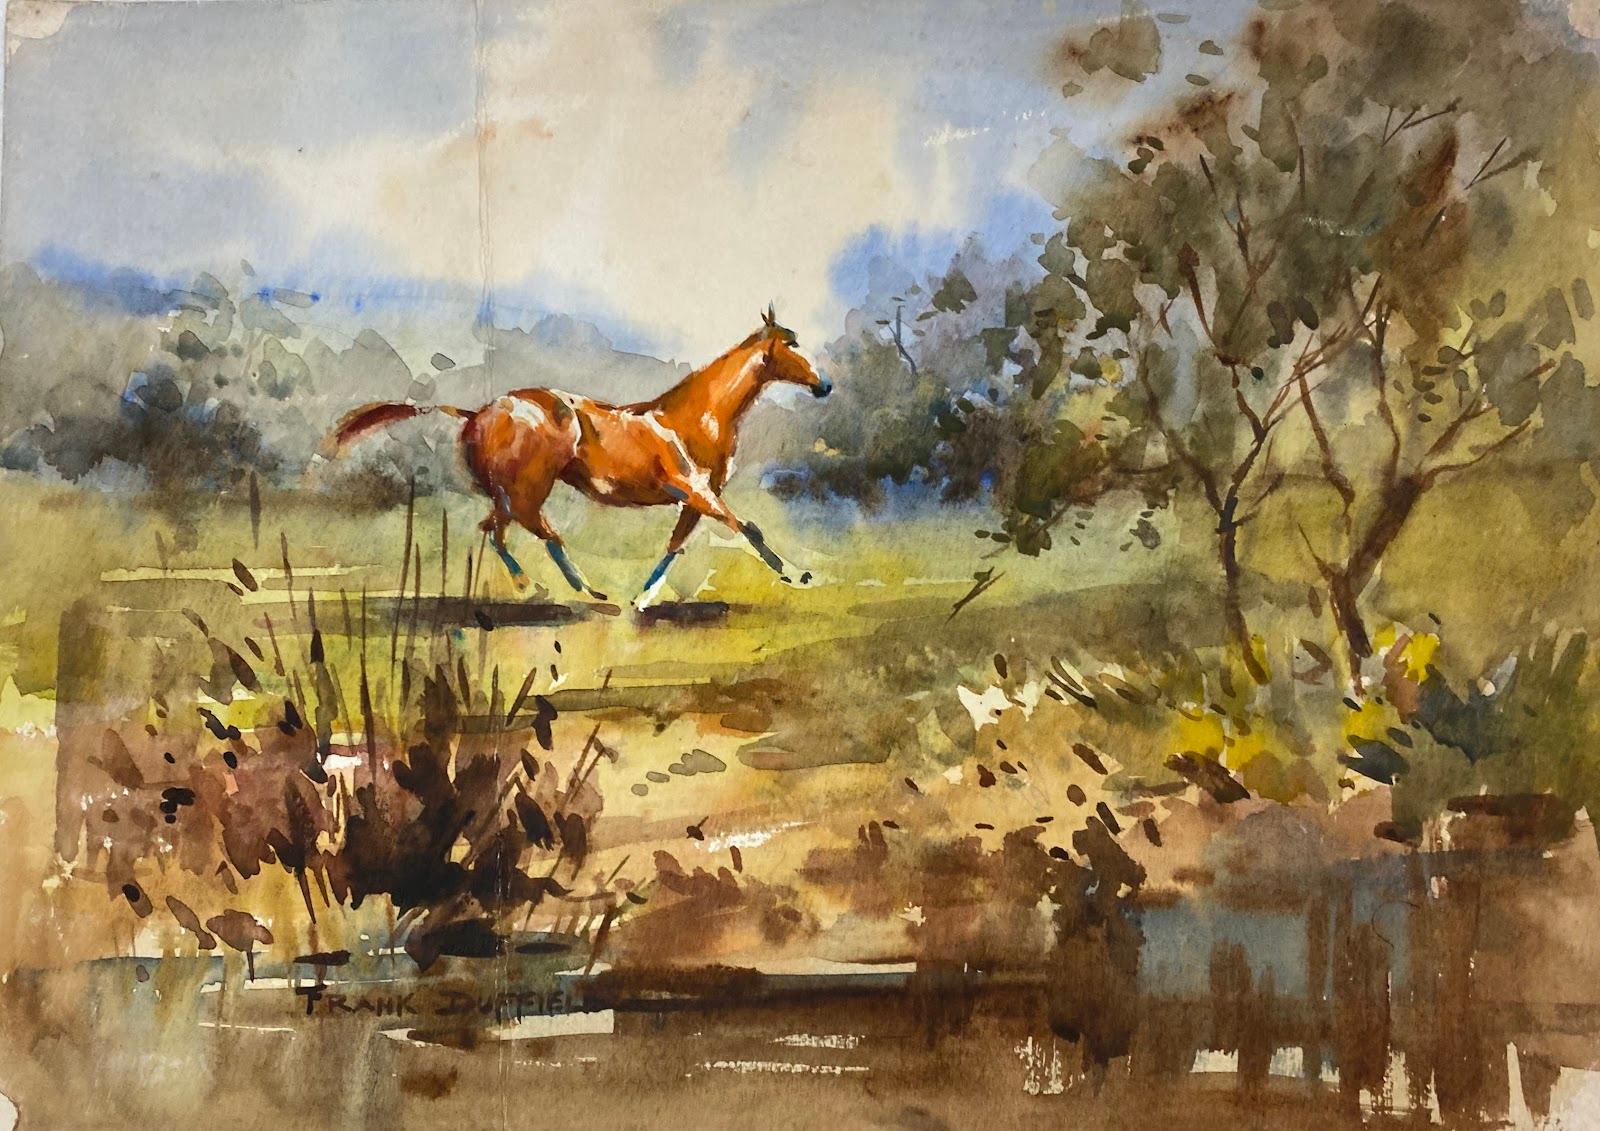 Frank Duffield Abstract Drawing - British Impressionist Painting Sorrel Horse Trotting In Field By Stream 